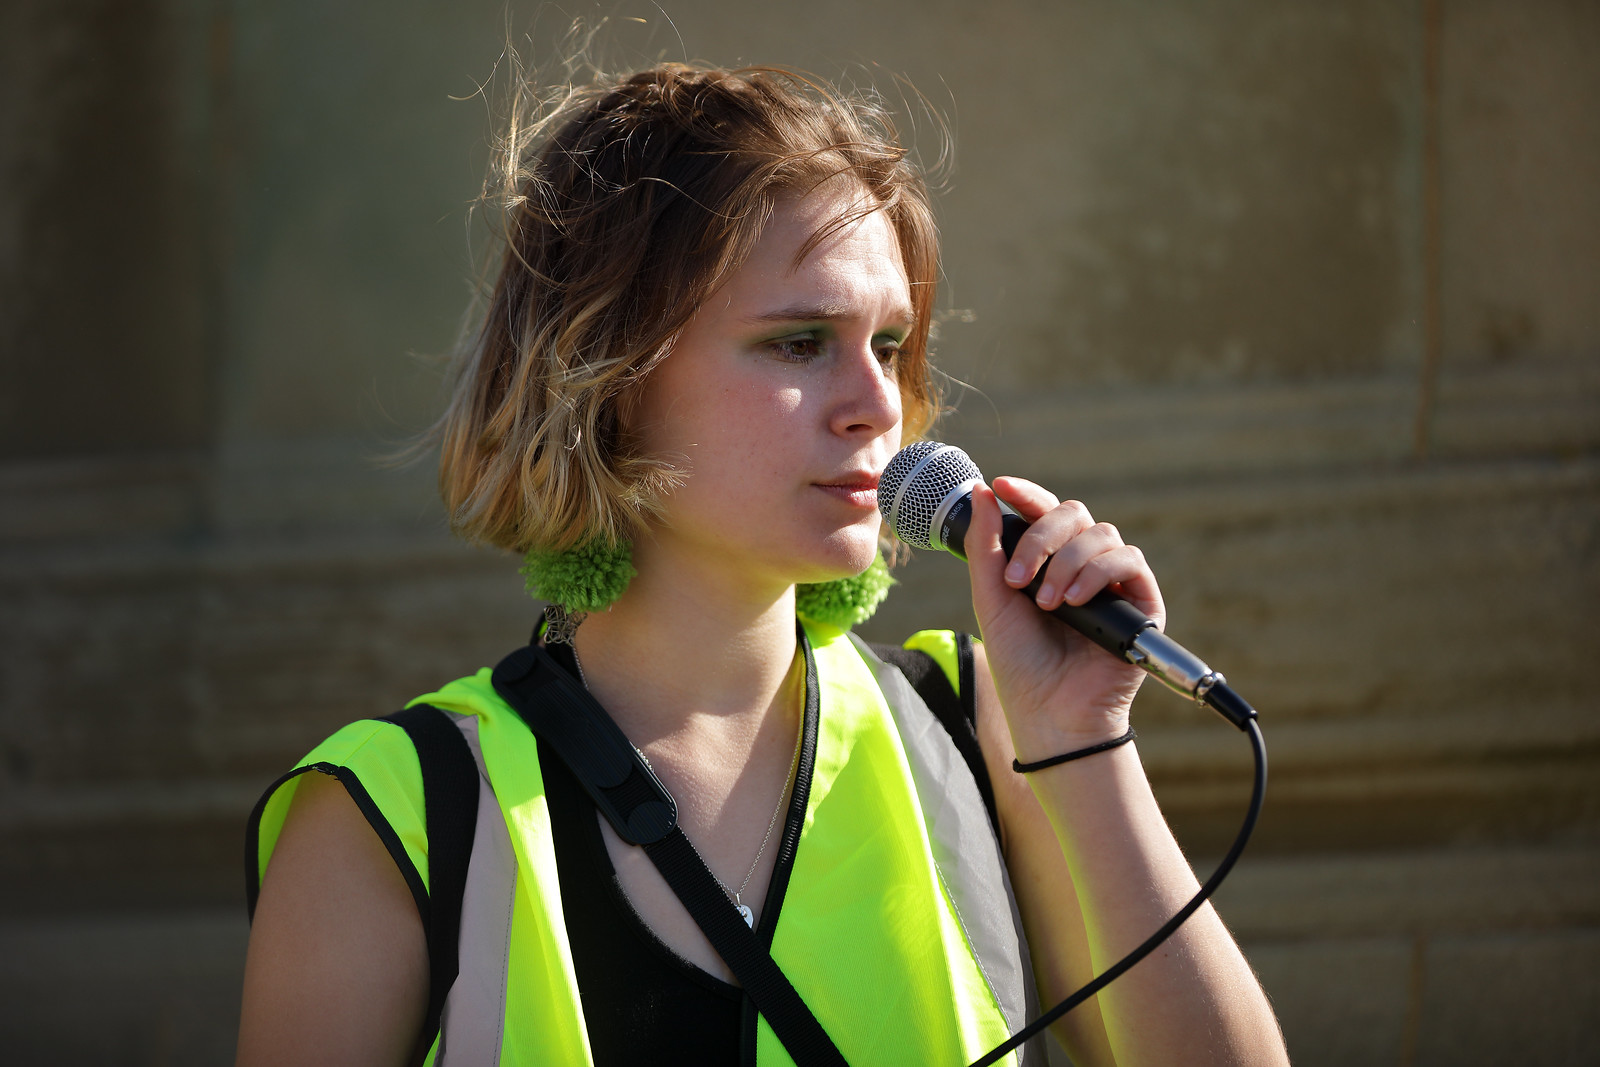 Brighton_Global_Climate_Strike_September_2019_Young_Woman_Speaking